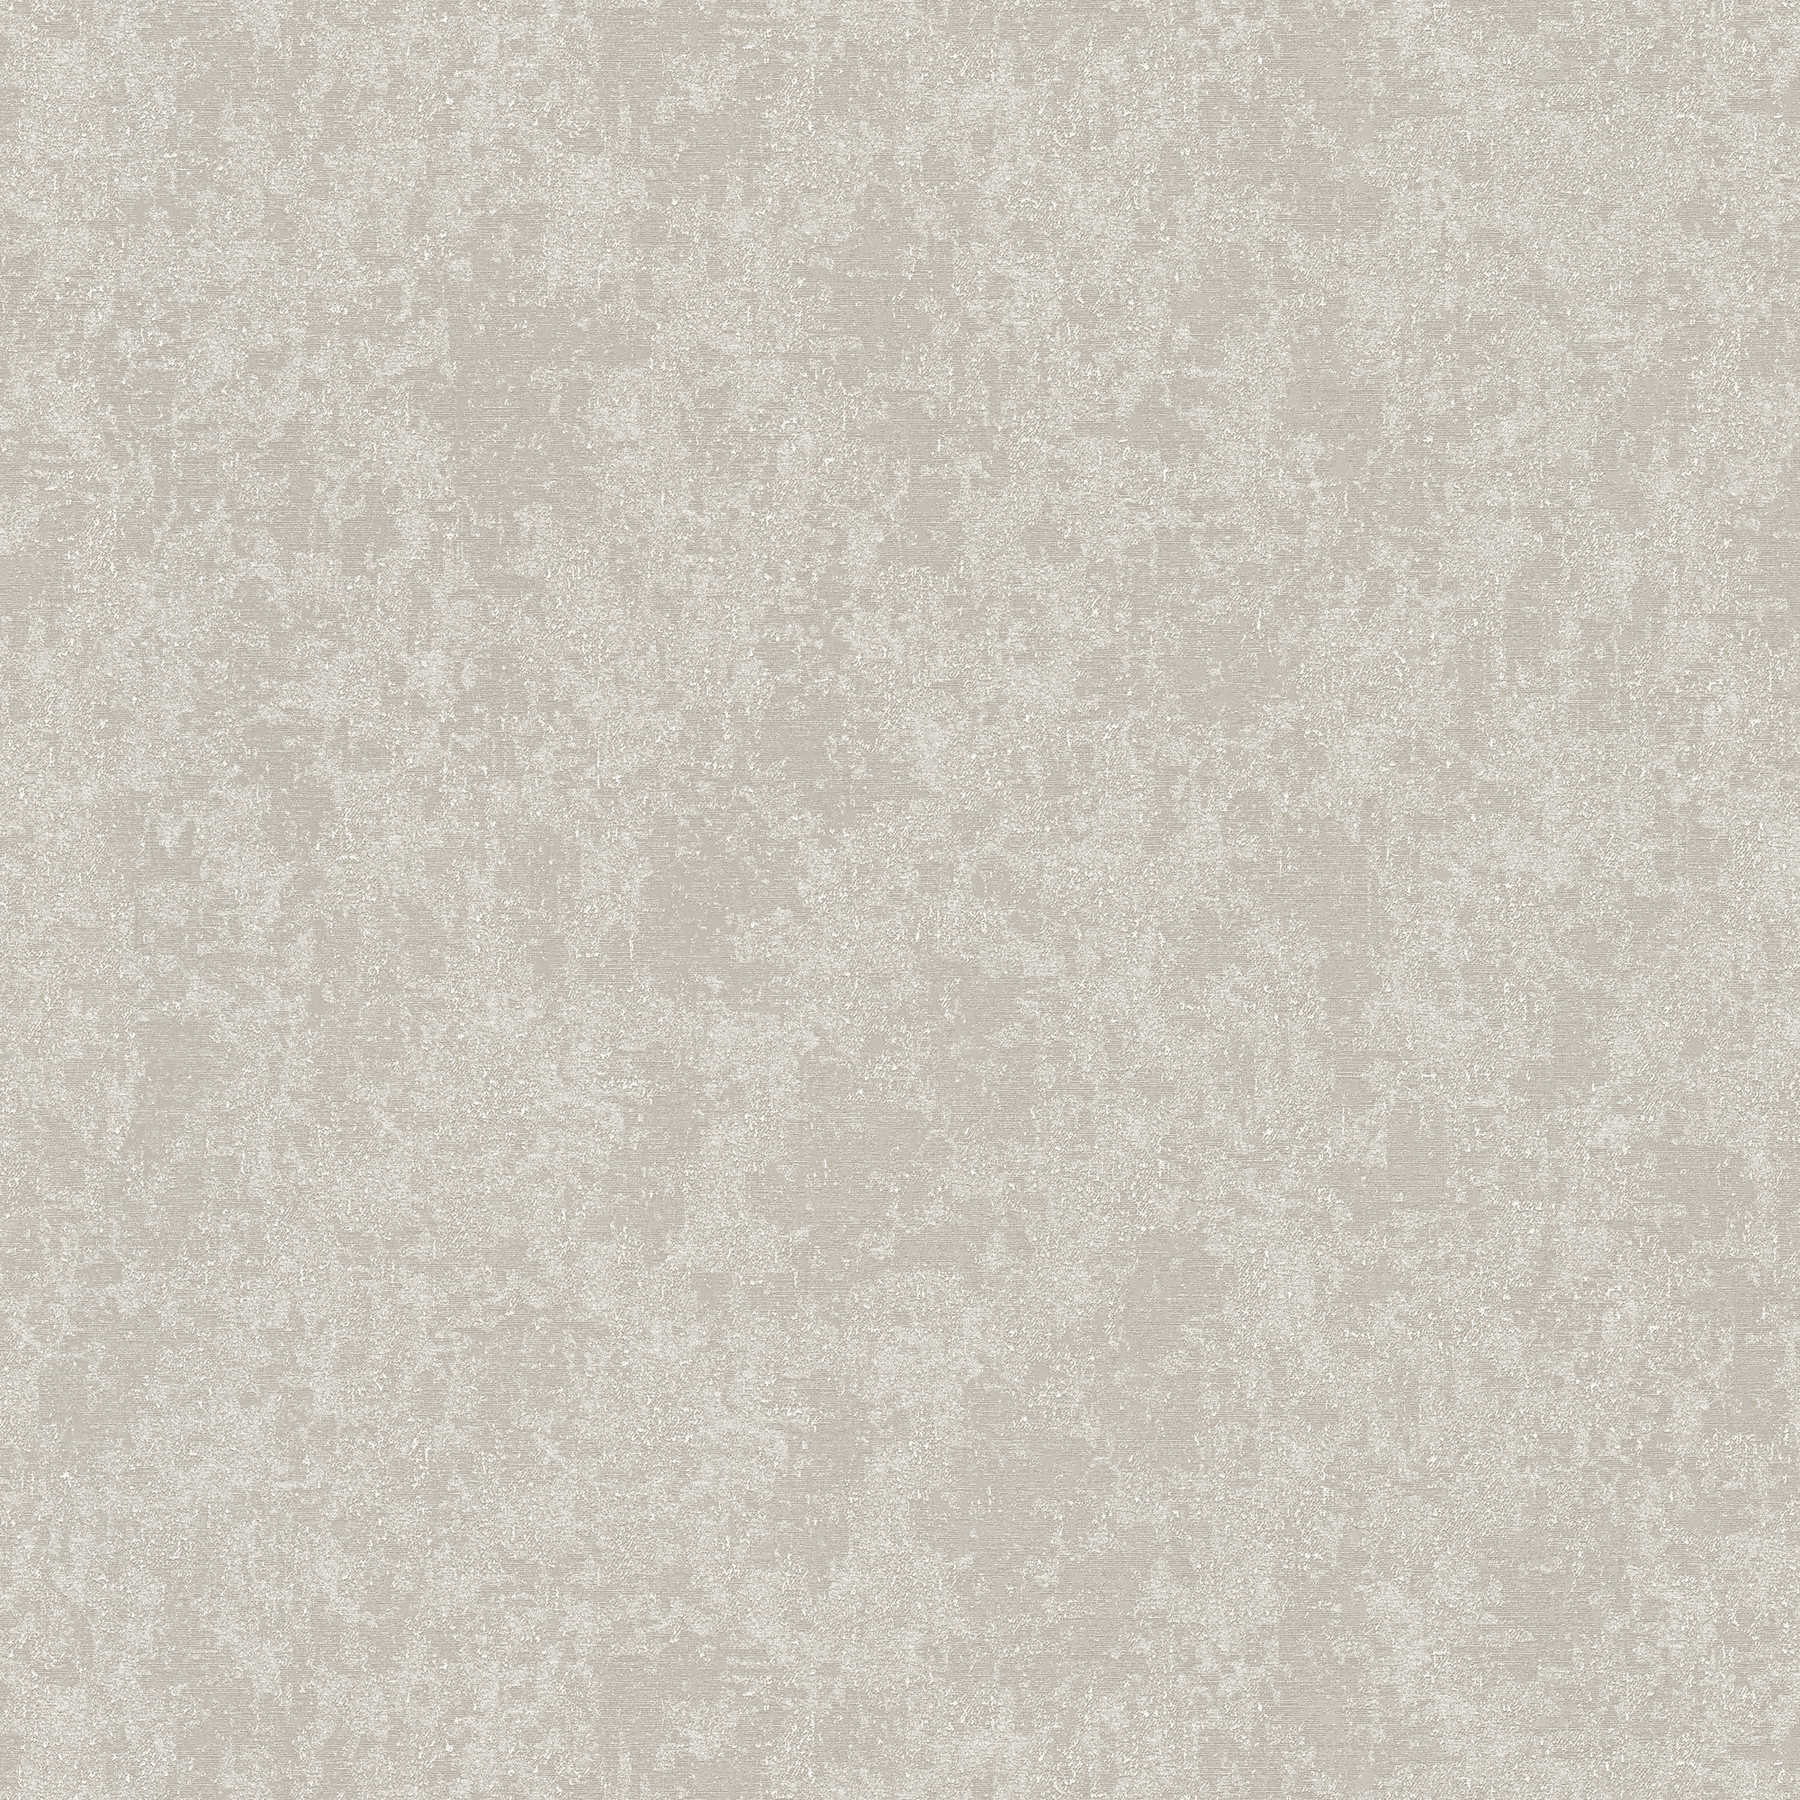 VERSACE wallpaper non-woven light grey with plaster look
